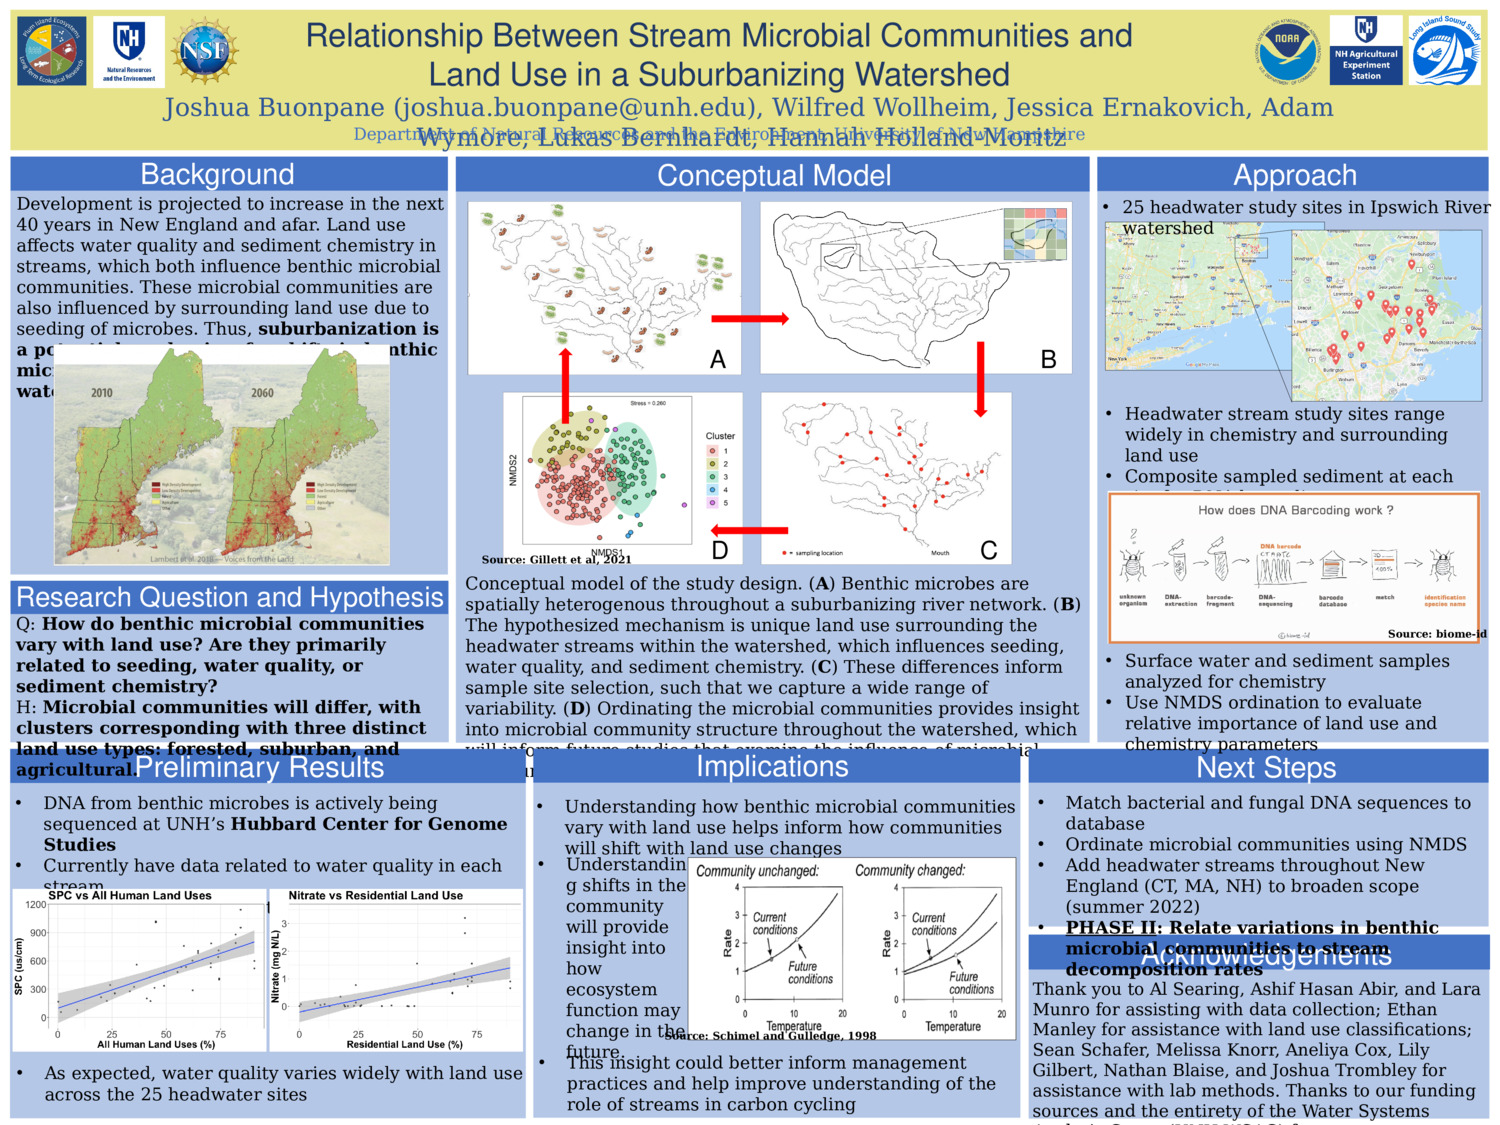 Relationship Between Stream Microbial Communities And Land Use In A Suburbanizing Watershed by jmn686